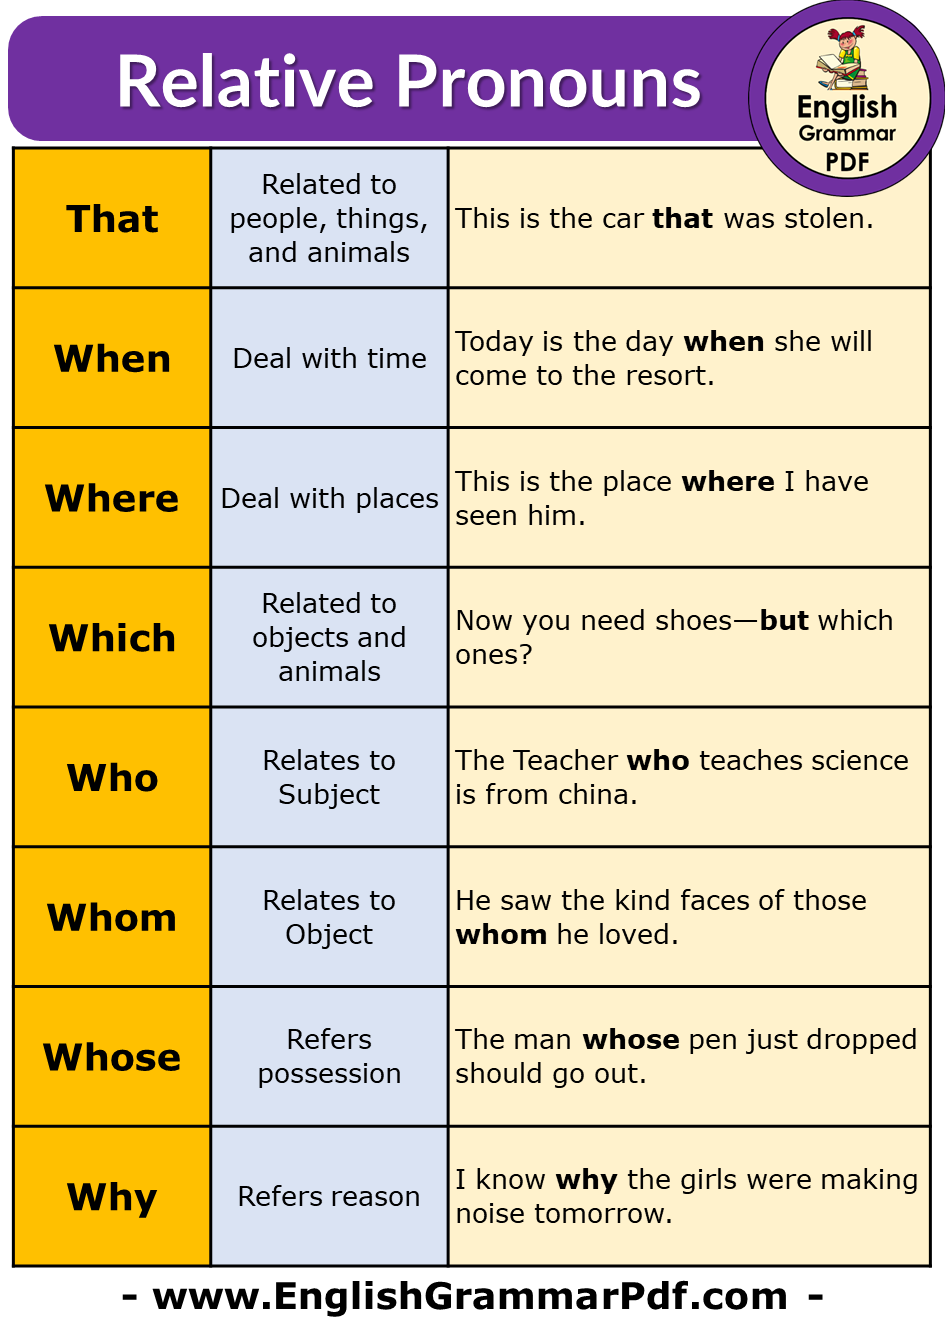 When was that перевод. Английский who which. Who which that whose правило. Предложения с relative pronouns. Who which where правило.